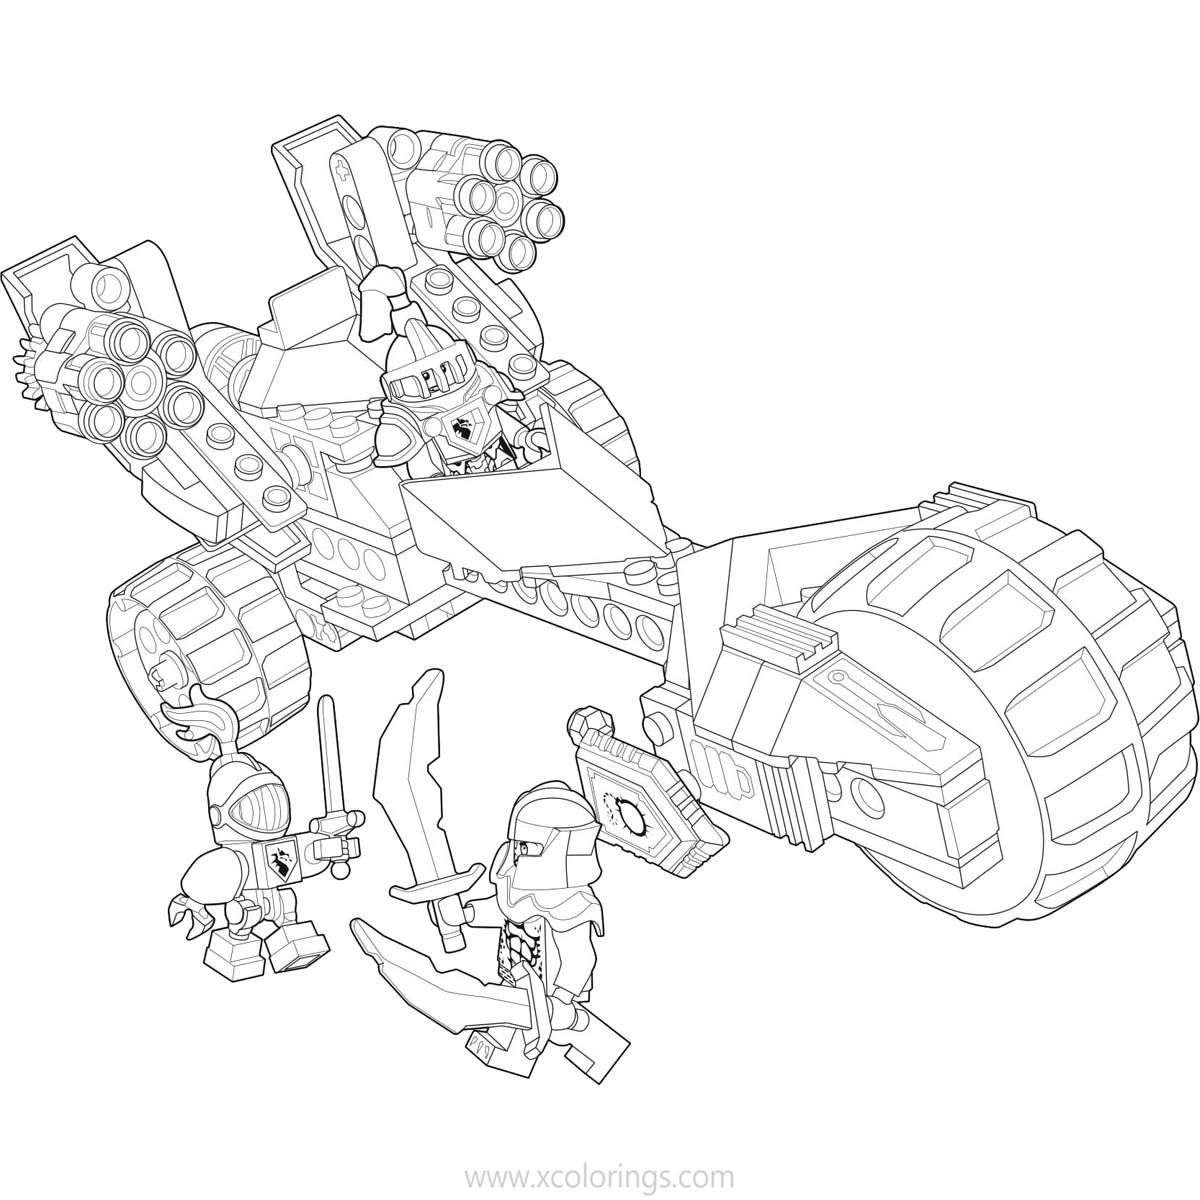 LEGO NEXO Knights Coloring Pages Fighting - XColorings.com